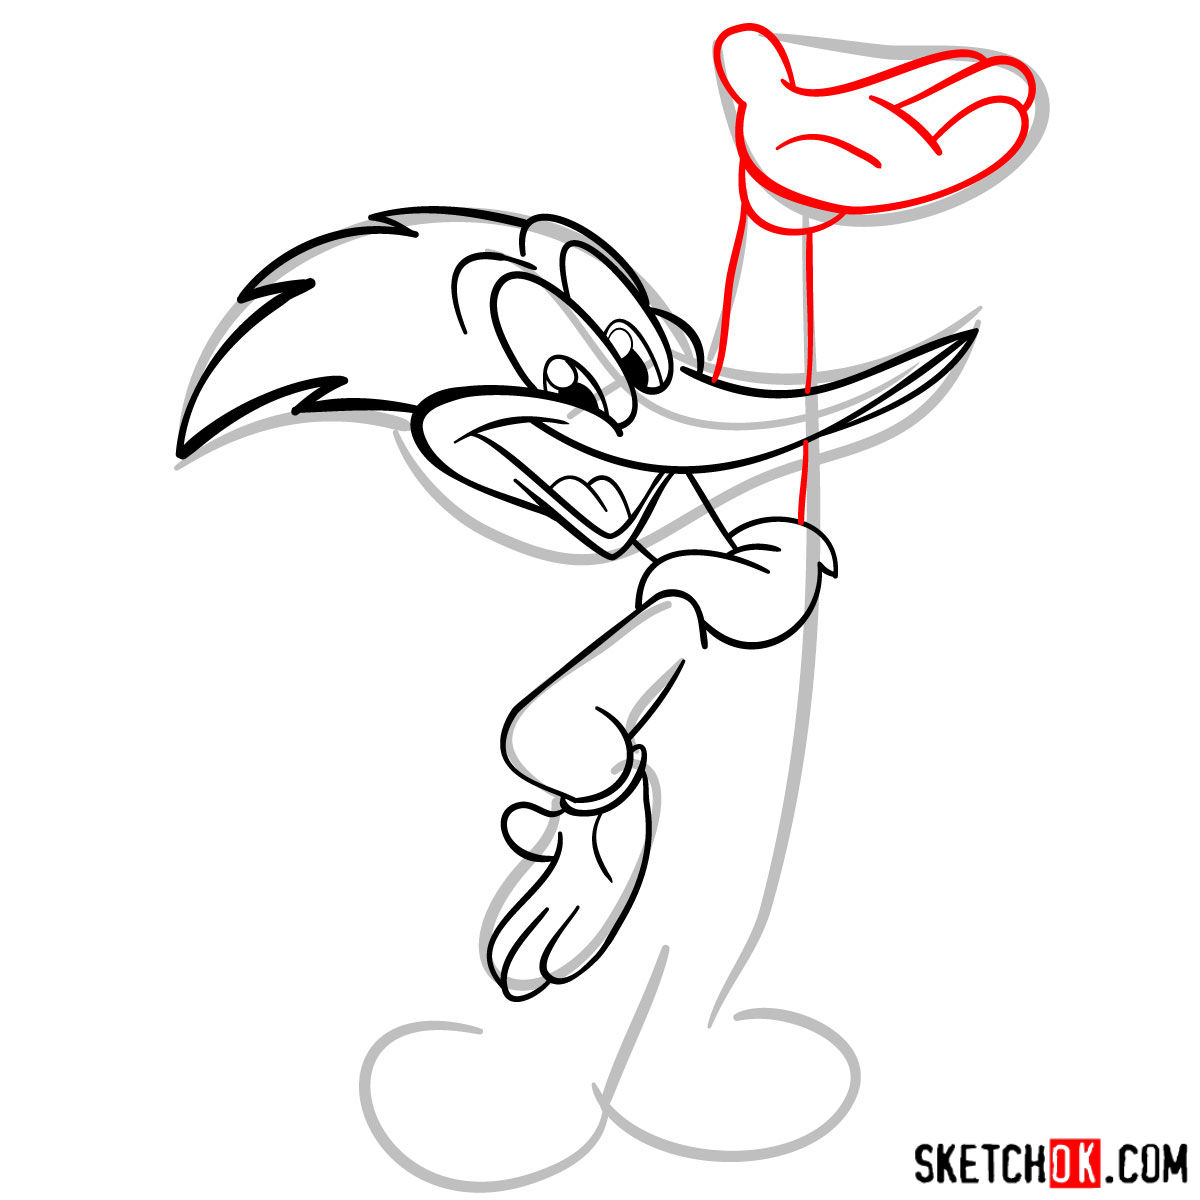 How to draw Woody Woodpecker - step 07